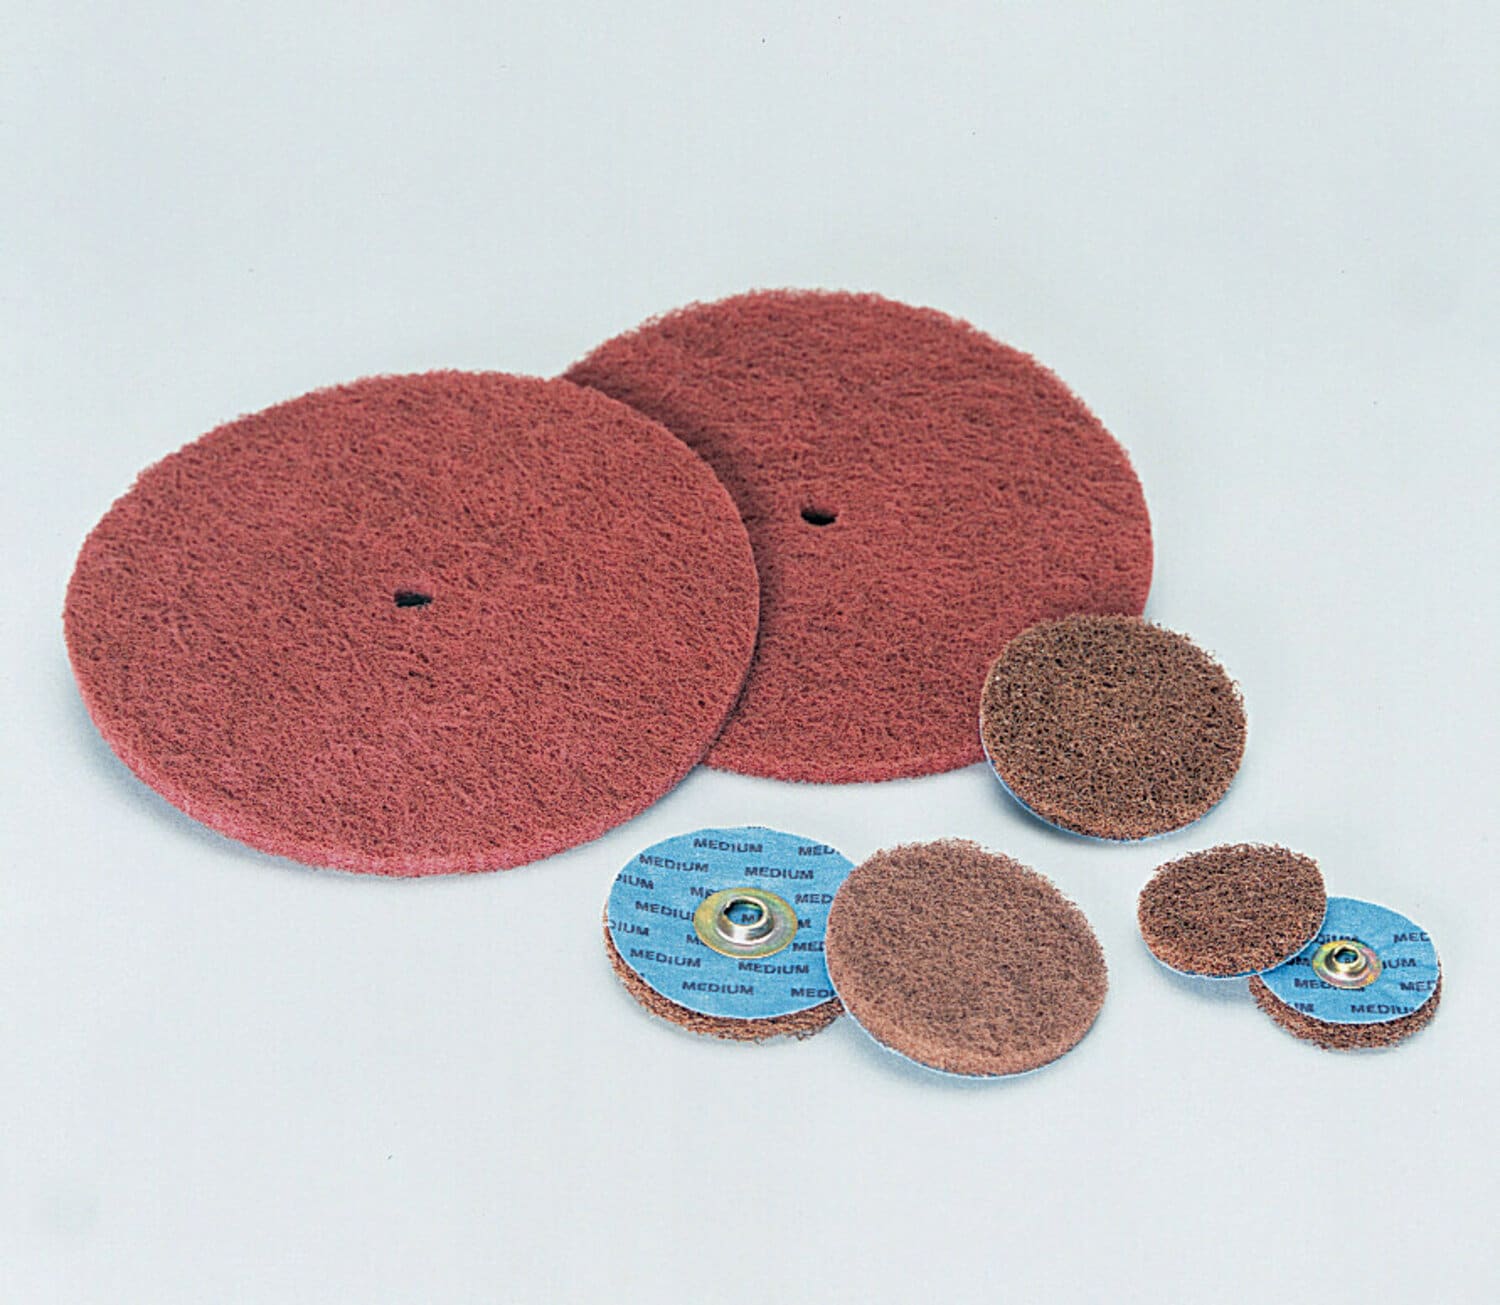 7010294950 - Standard Abrasives Buff and Blend GP Disc, 840609, 5 in x 1/2 in A FIN,
10/Pac, 100 ea/Case